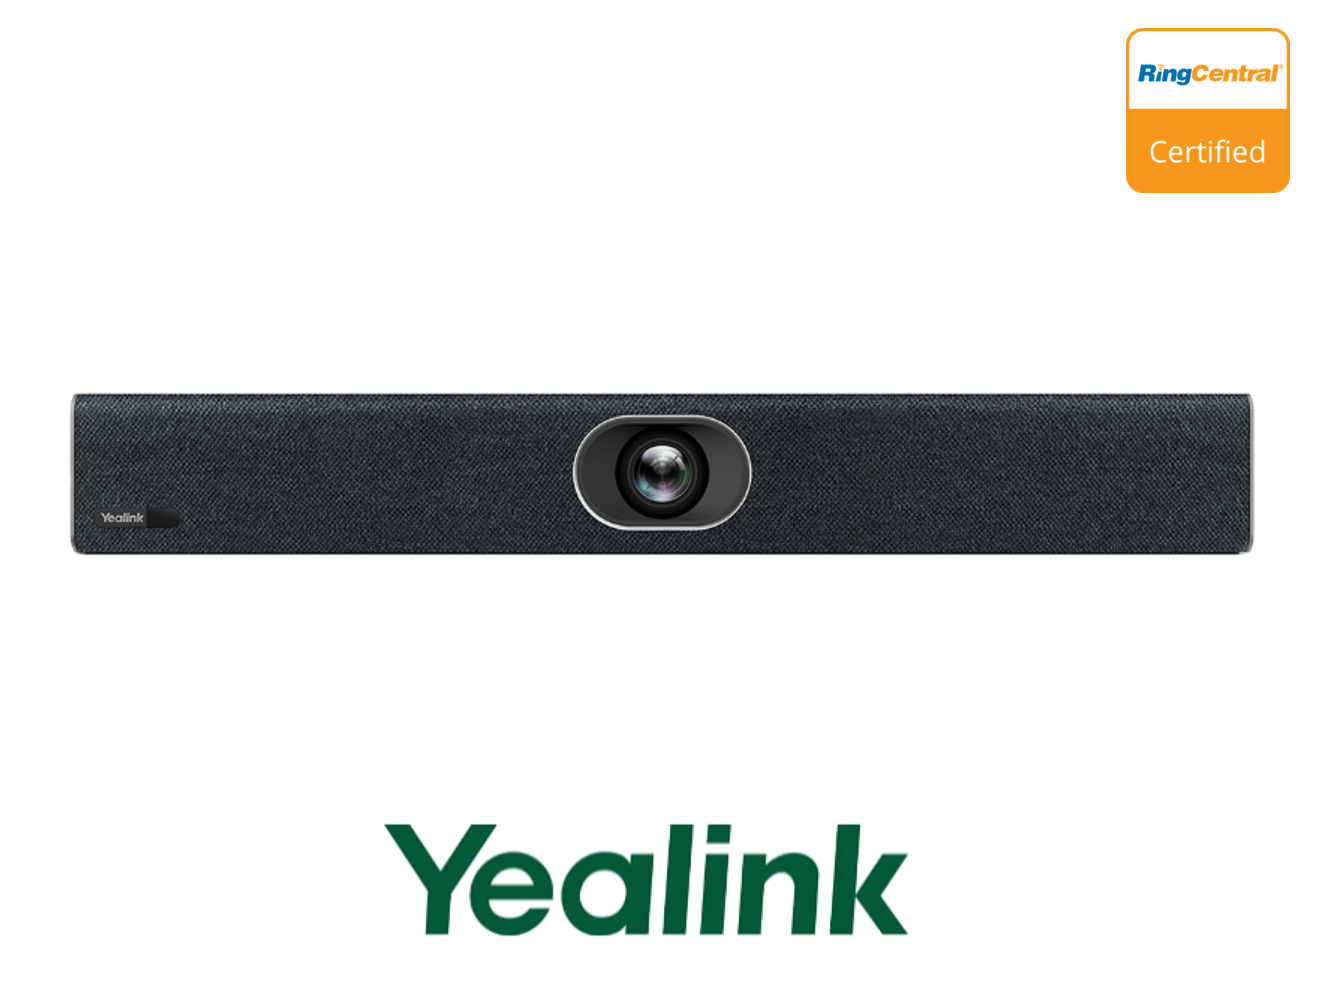 Yealink MeetingBar A20 with CTP18 Room Controller RingCentral Kit